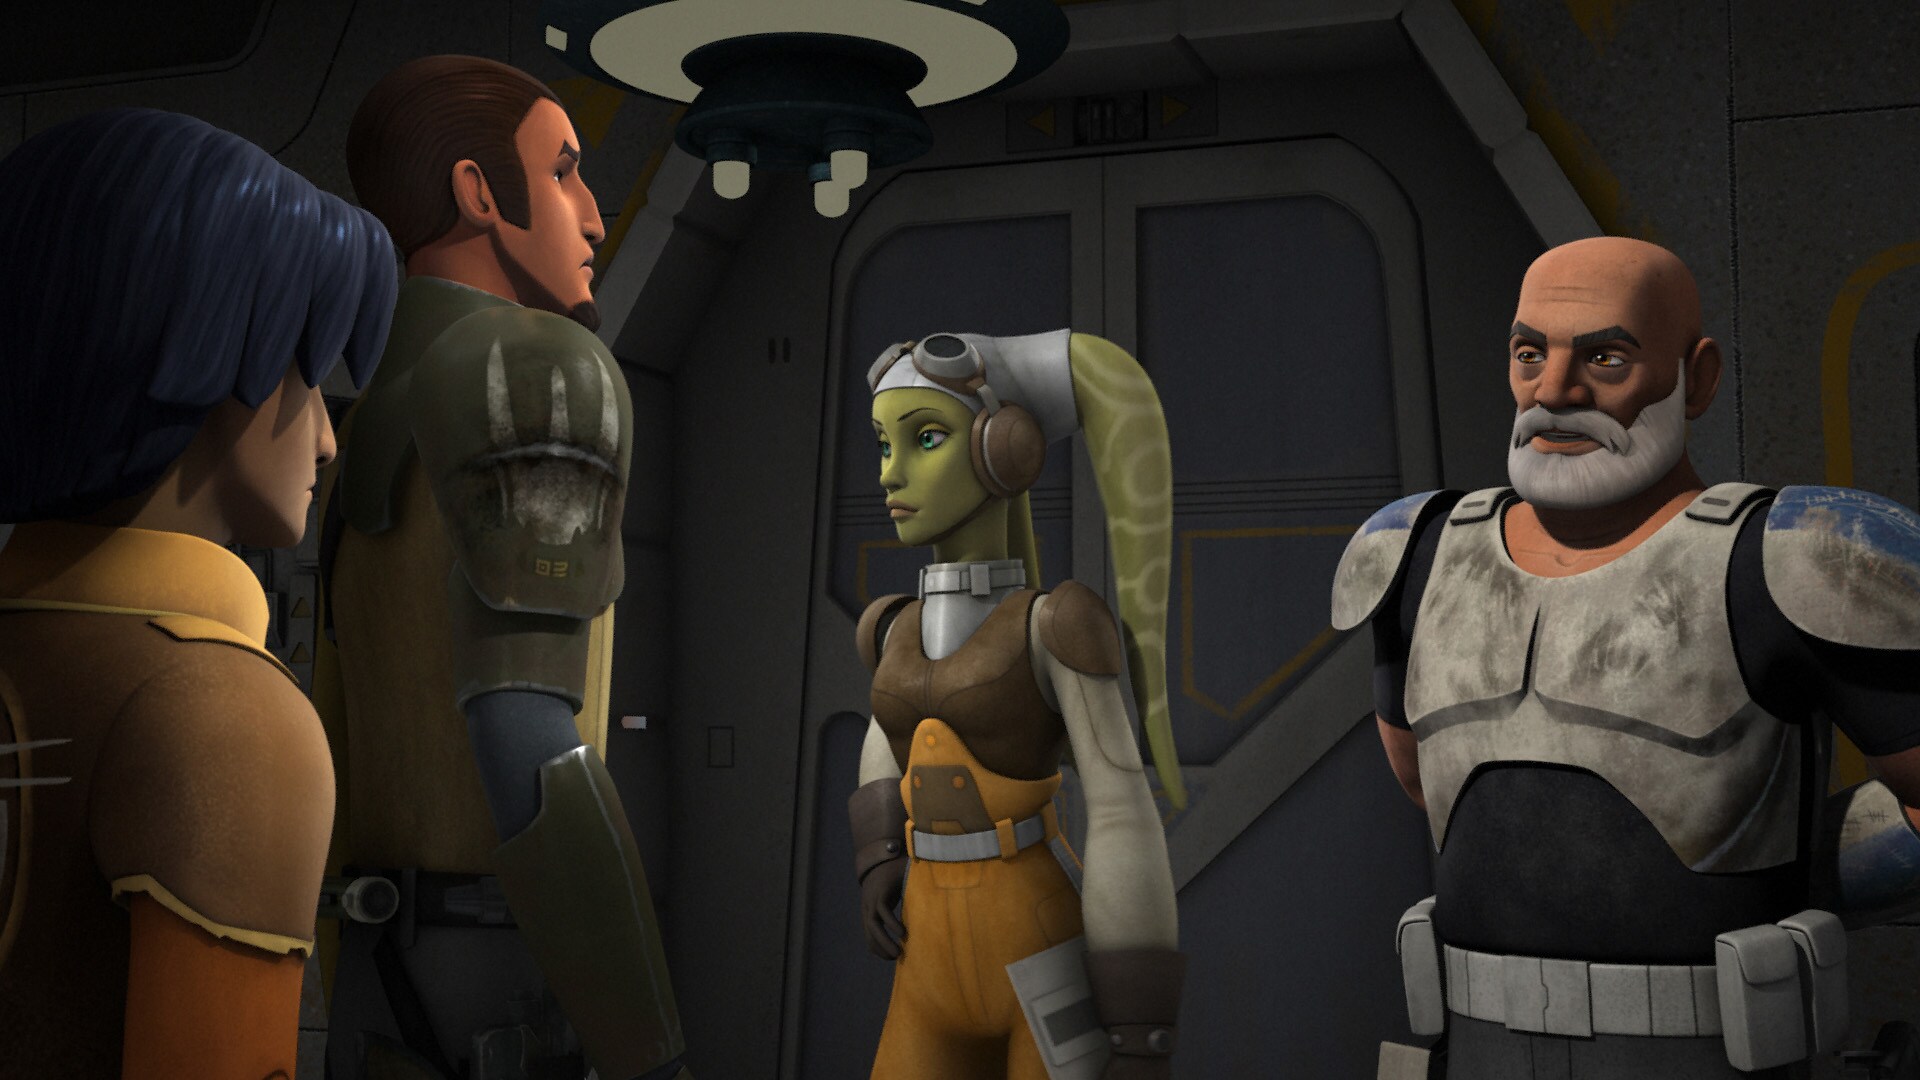 This leads to a heated exchange between Kanan and Rex, who says that the Jedi general he served h...